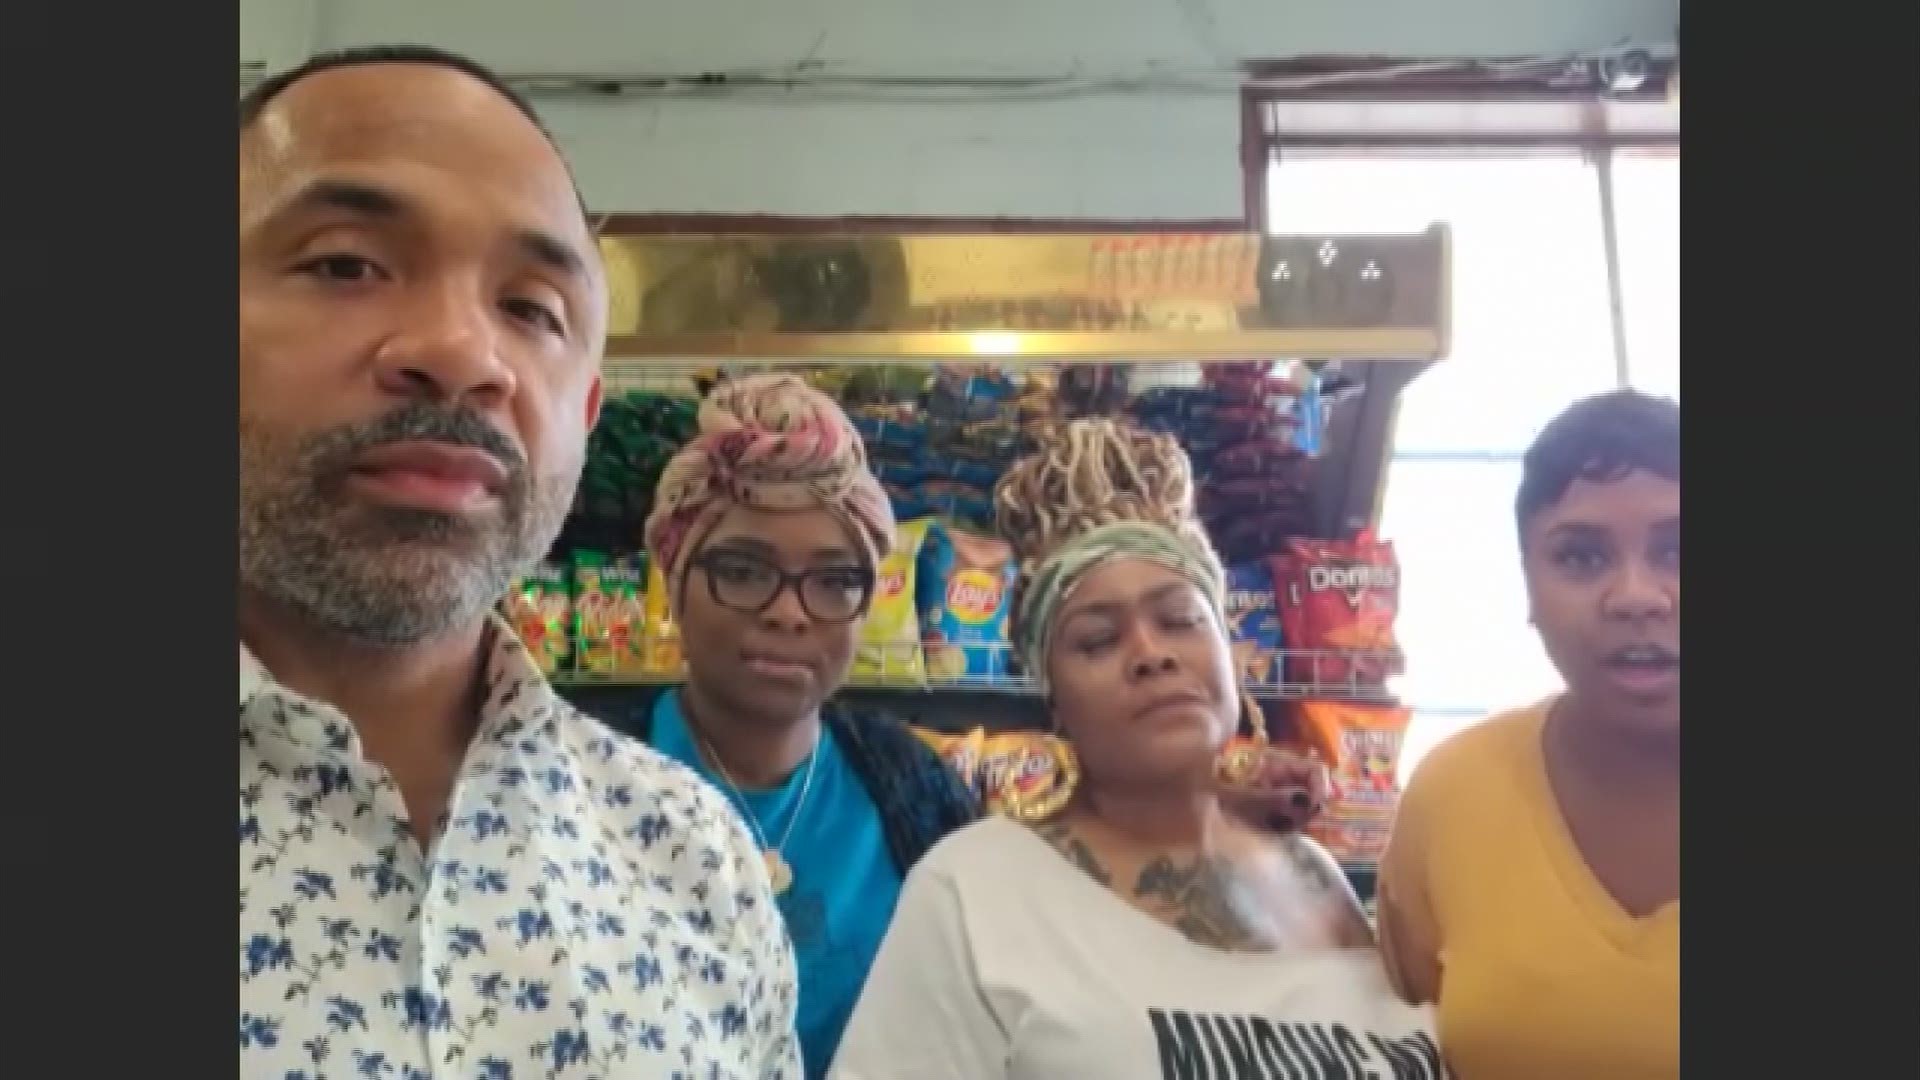 During the recent protests, a local group noticed something else: Blacks helping Blacks